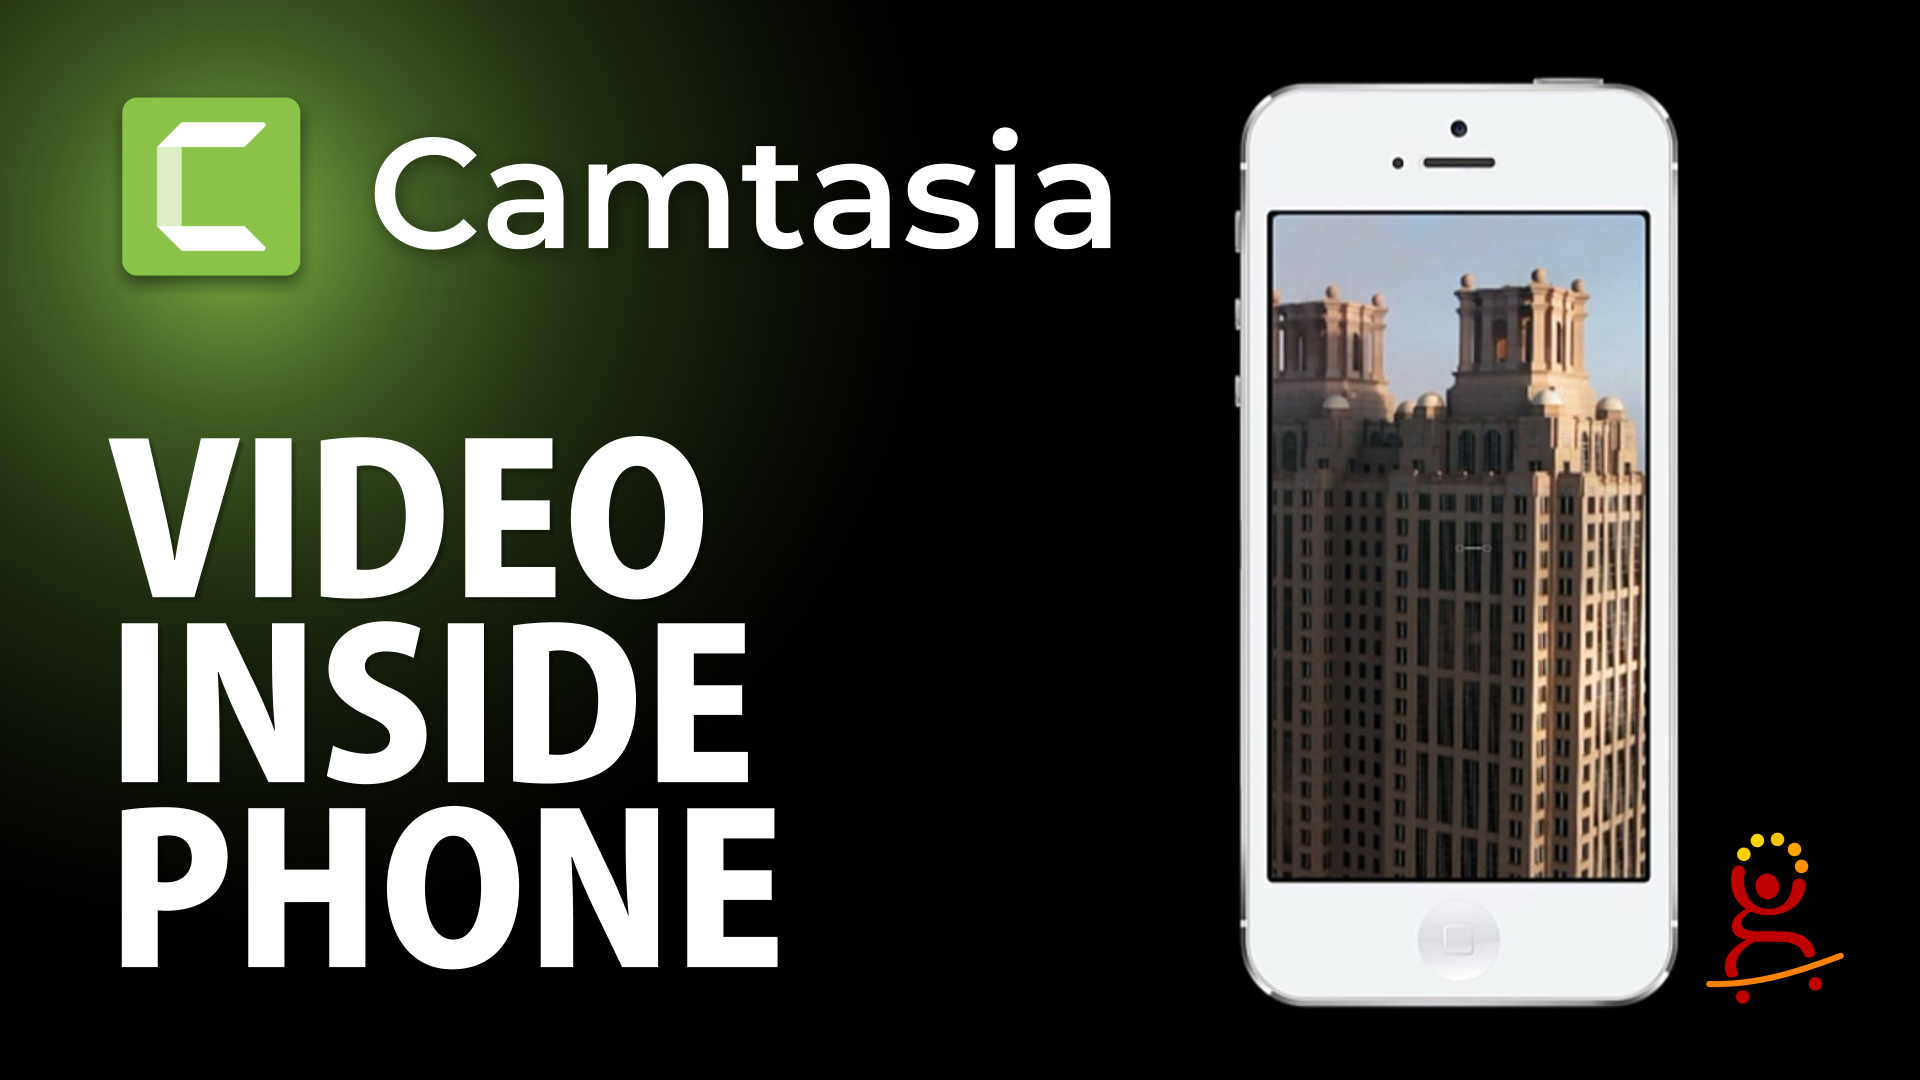 Play video inside phone or Custom Device Frame in Camtasia 2021 | Media Matte and Masking